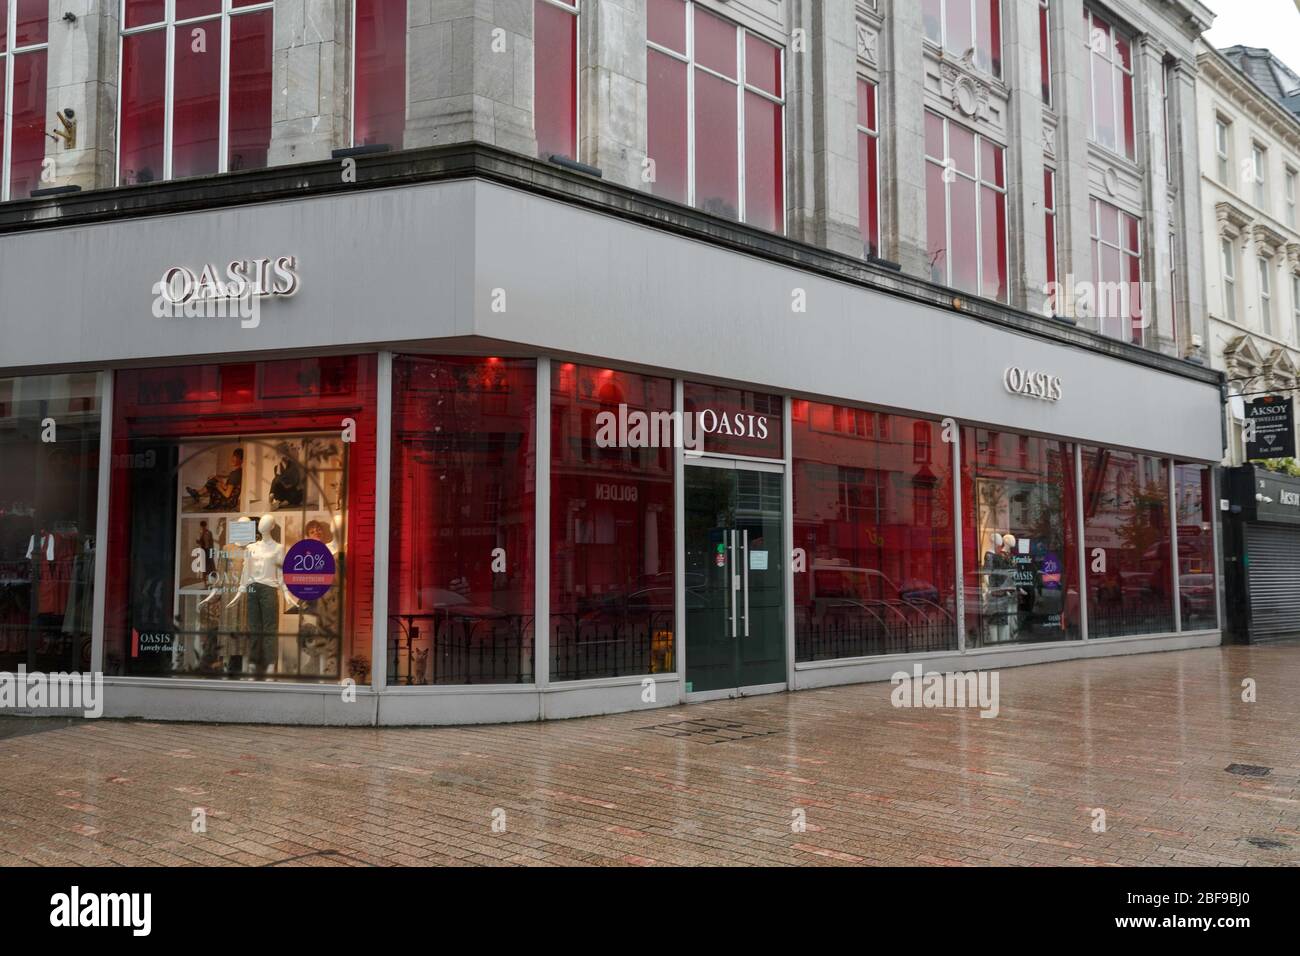 Cork, Ireland. 17th Apr, 2020. Retailers Feeling Impact of Covid-19, Cork City. Debenhams and Oasis, two cork city retailers have shut down so far due to the devastating affects of Covid-19. Credit: Damian Coleman/Alamy Live News Stock Photo